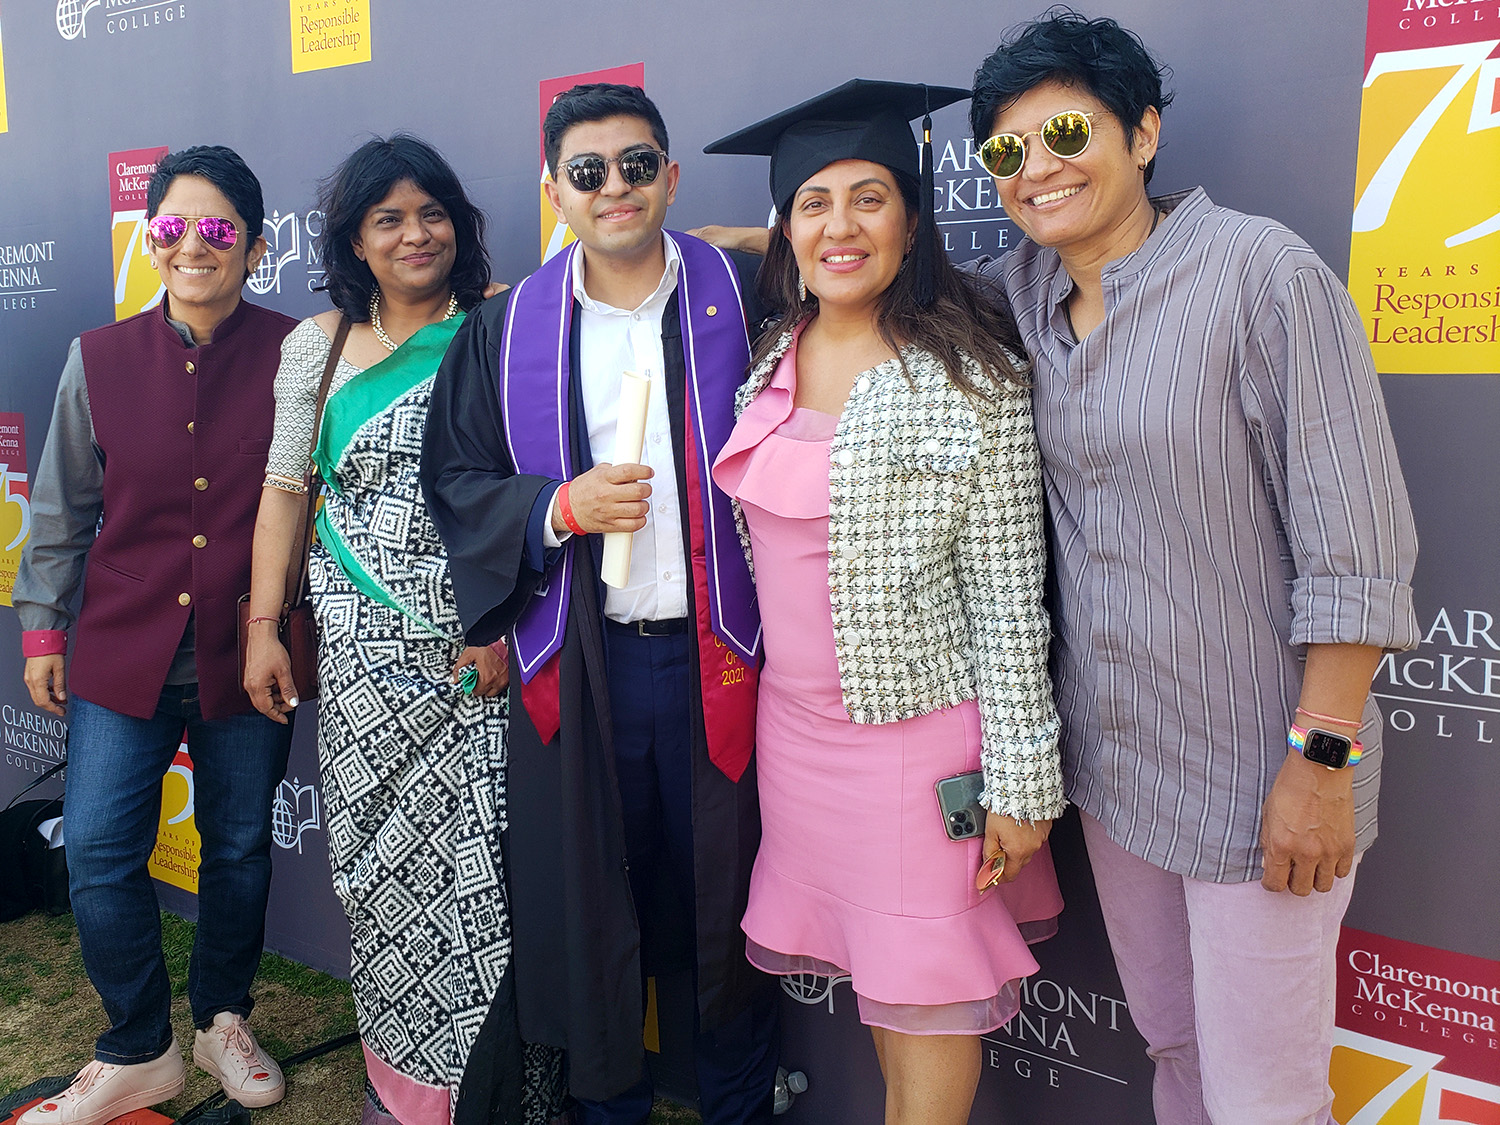 Sahib Bhasin ’21 and his family photographed together against the gray CMC 75th Anniversary logo pattern backdrop. His mother wears his mortar board hat.